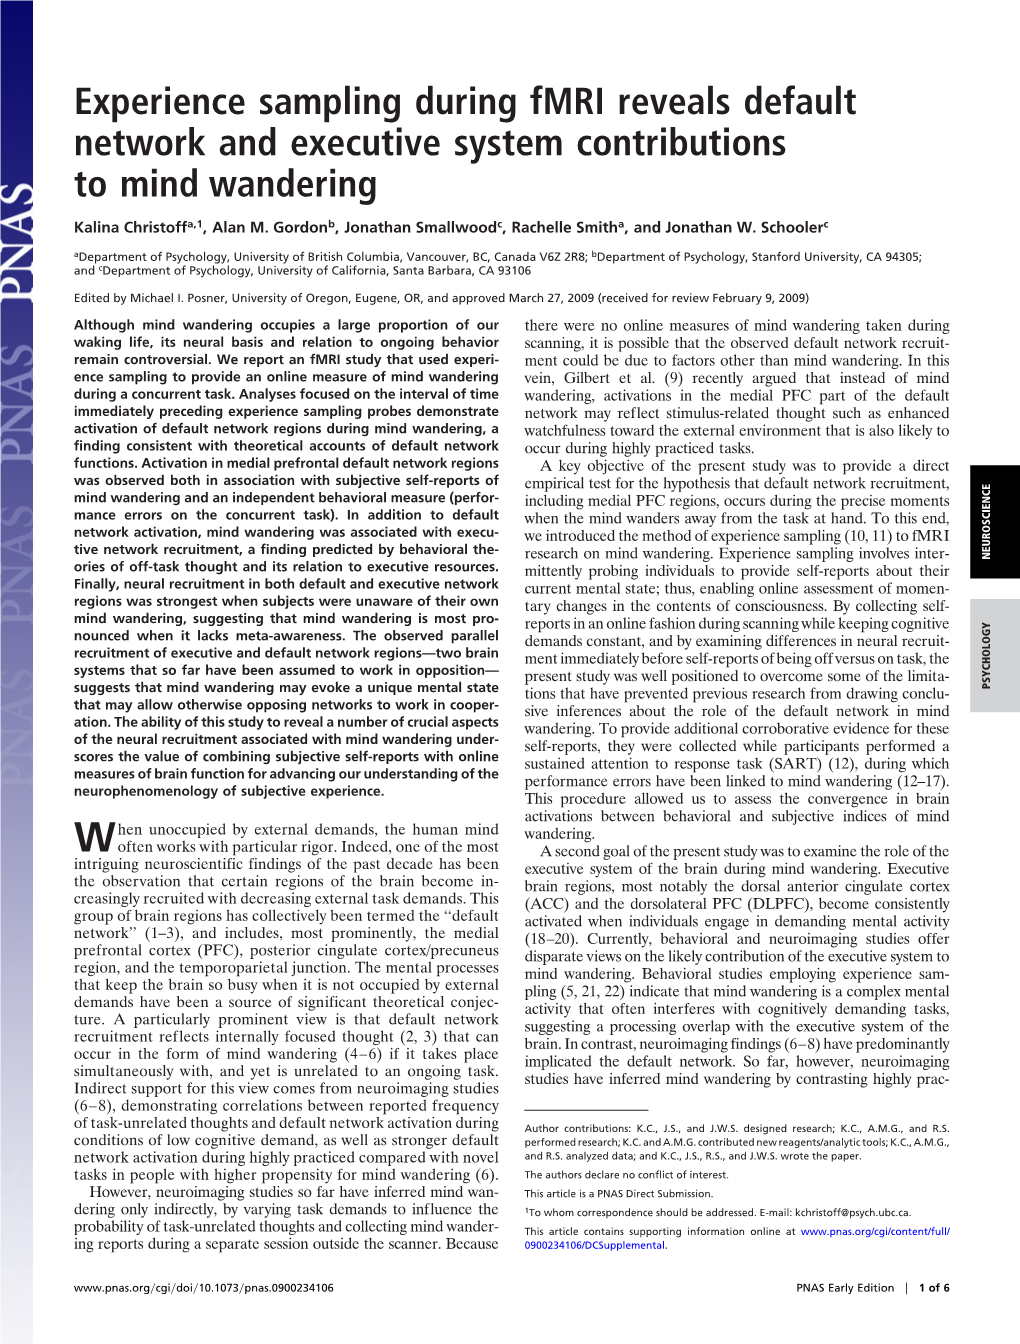 Experience Sampling During Fmri Reveals Default Network and Executive System Contributions to Mind Wandering